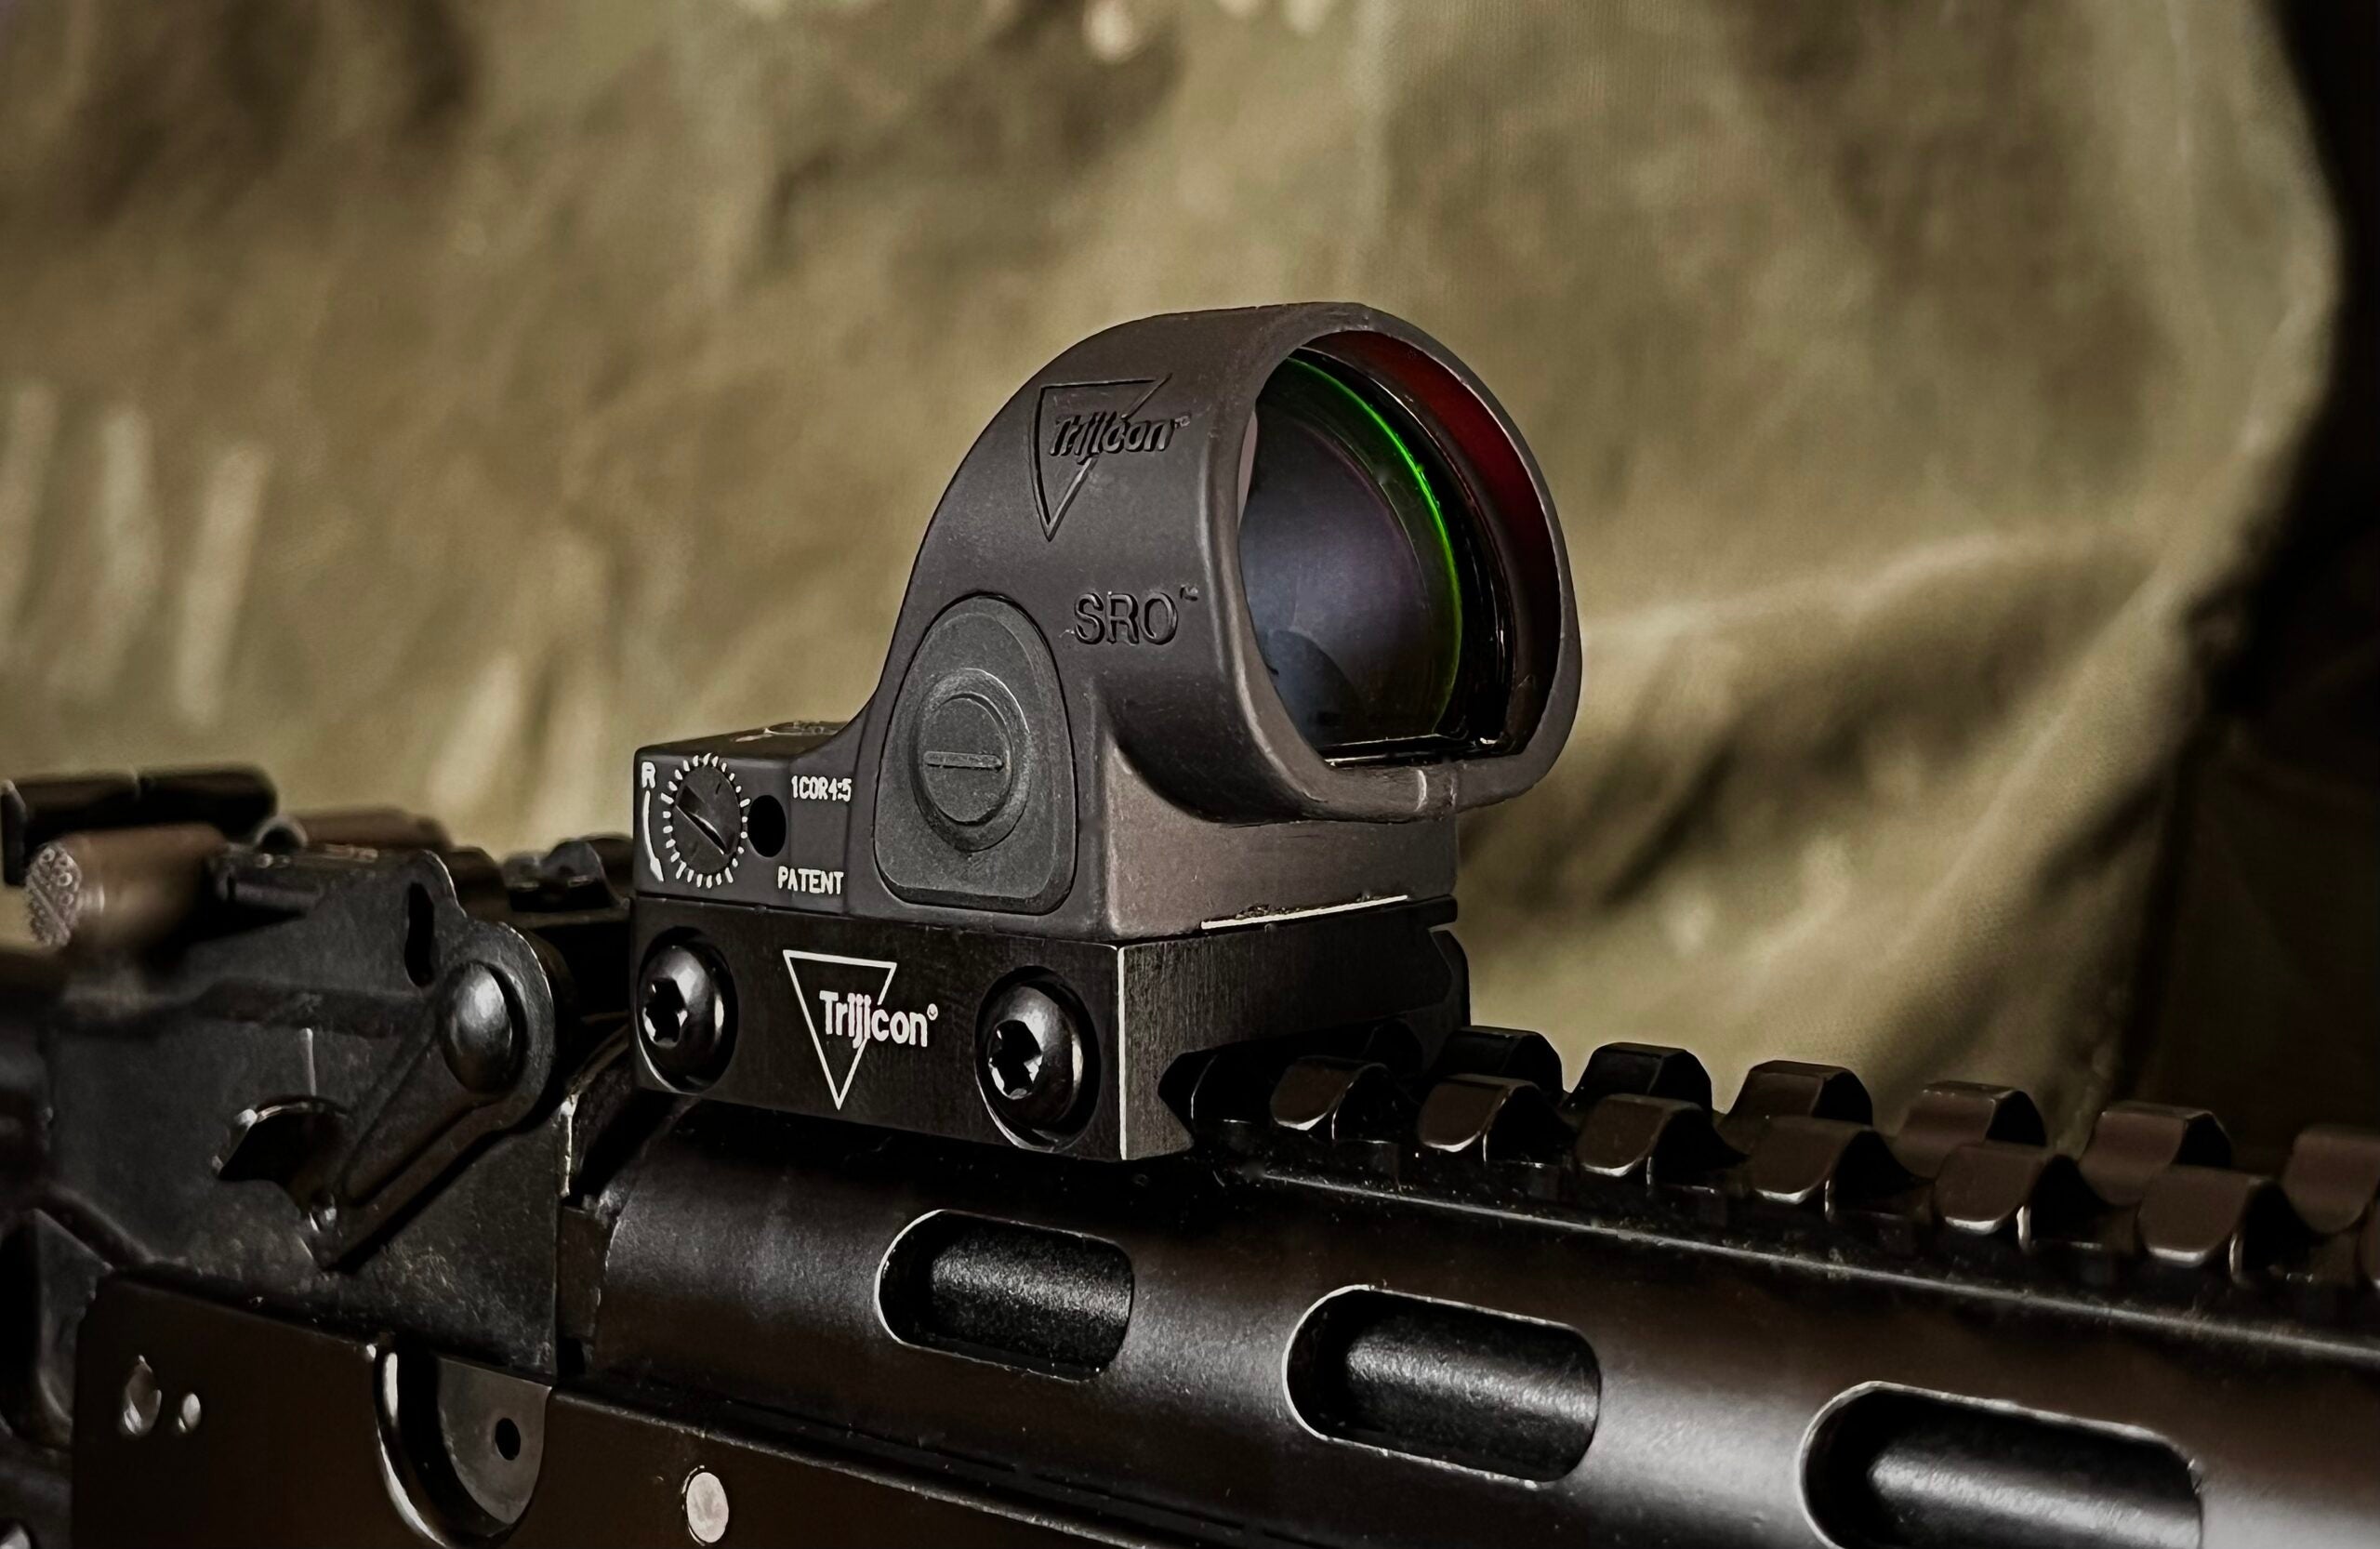 A Trijicon SRO red-dot sight mounted to a Picatinny rail on a Modern Sporting Rifle.